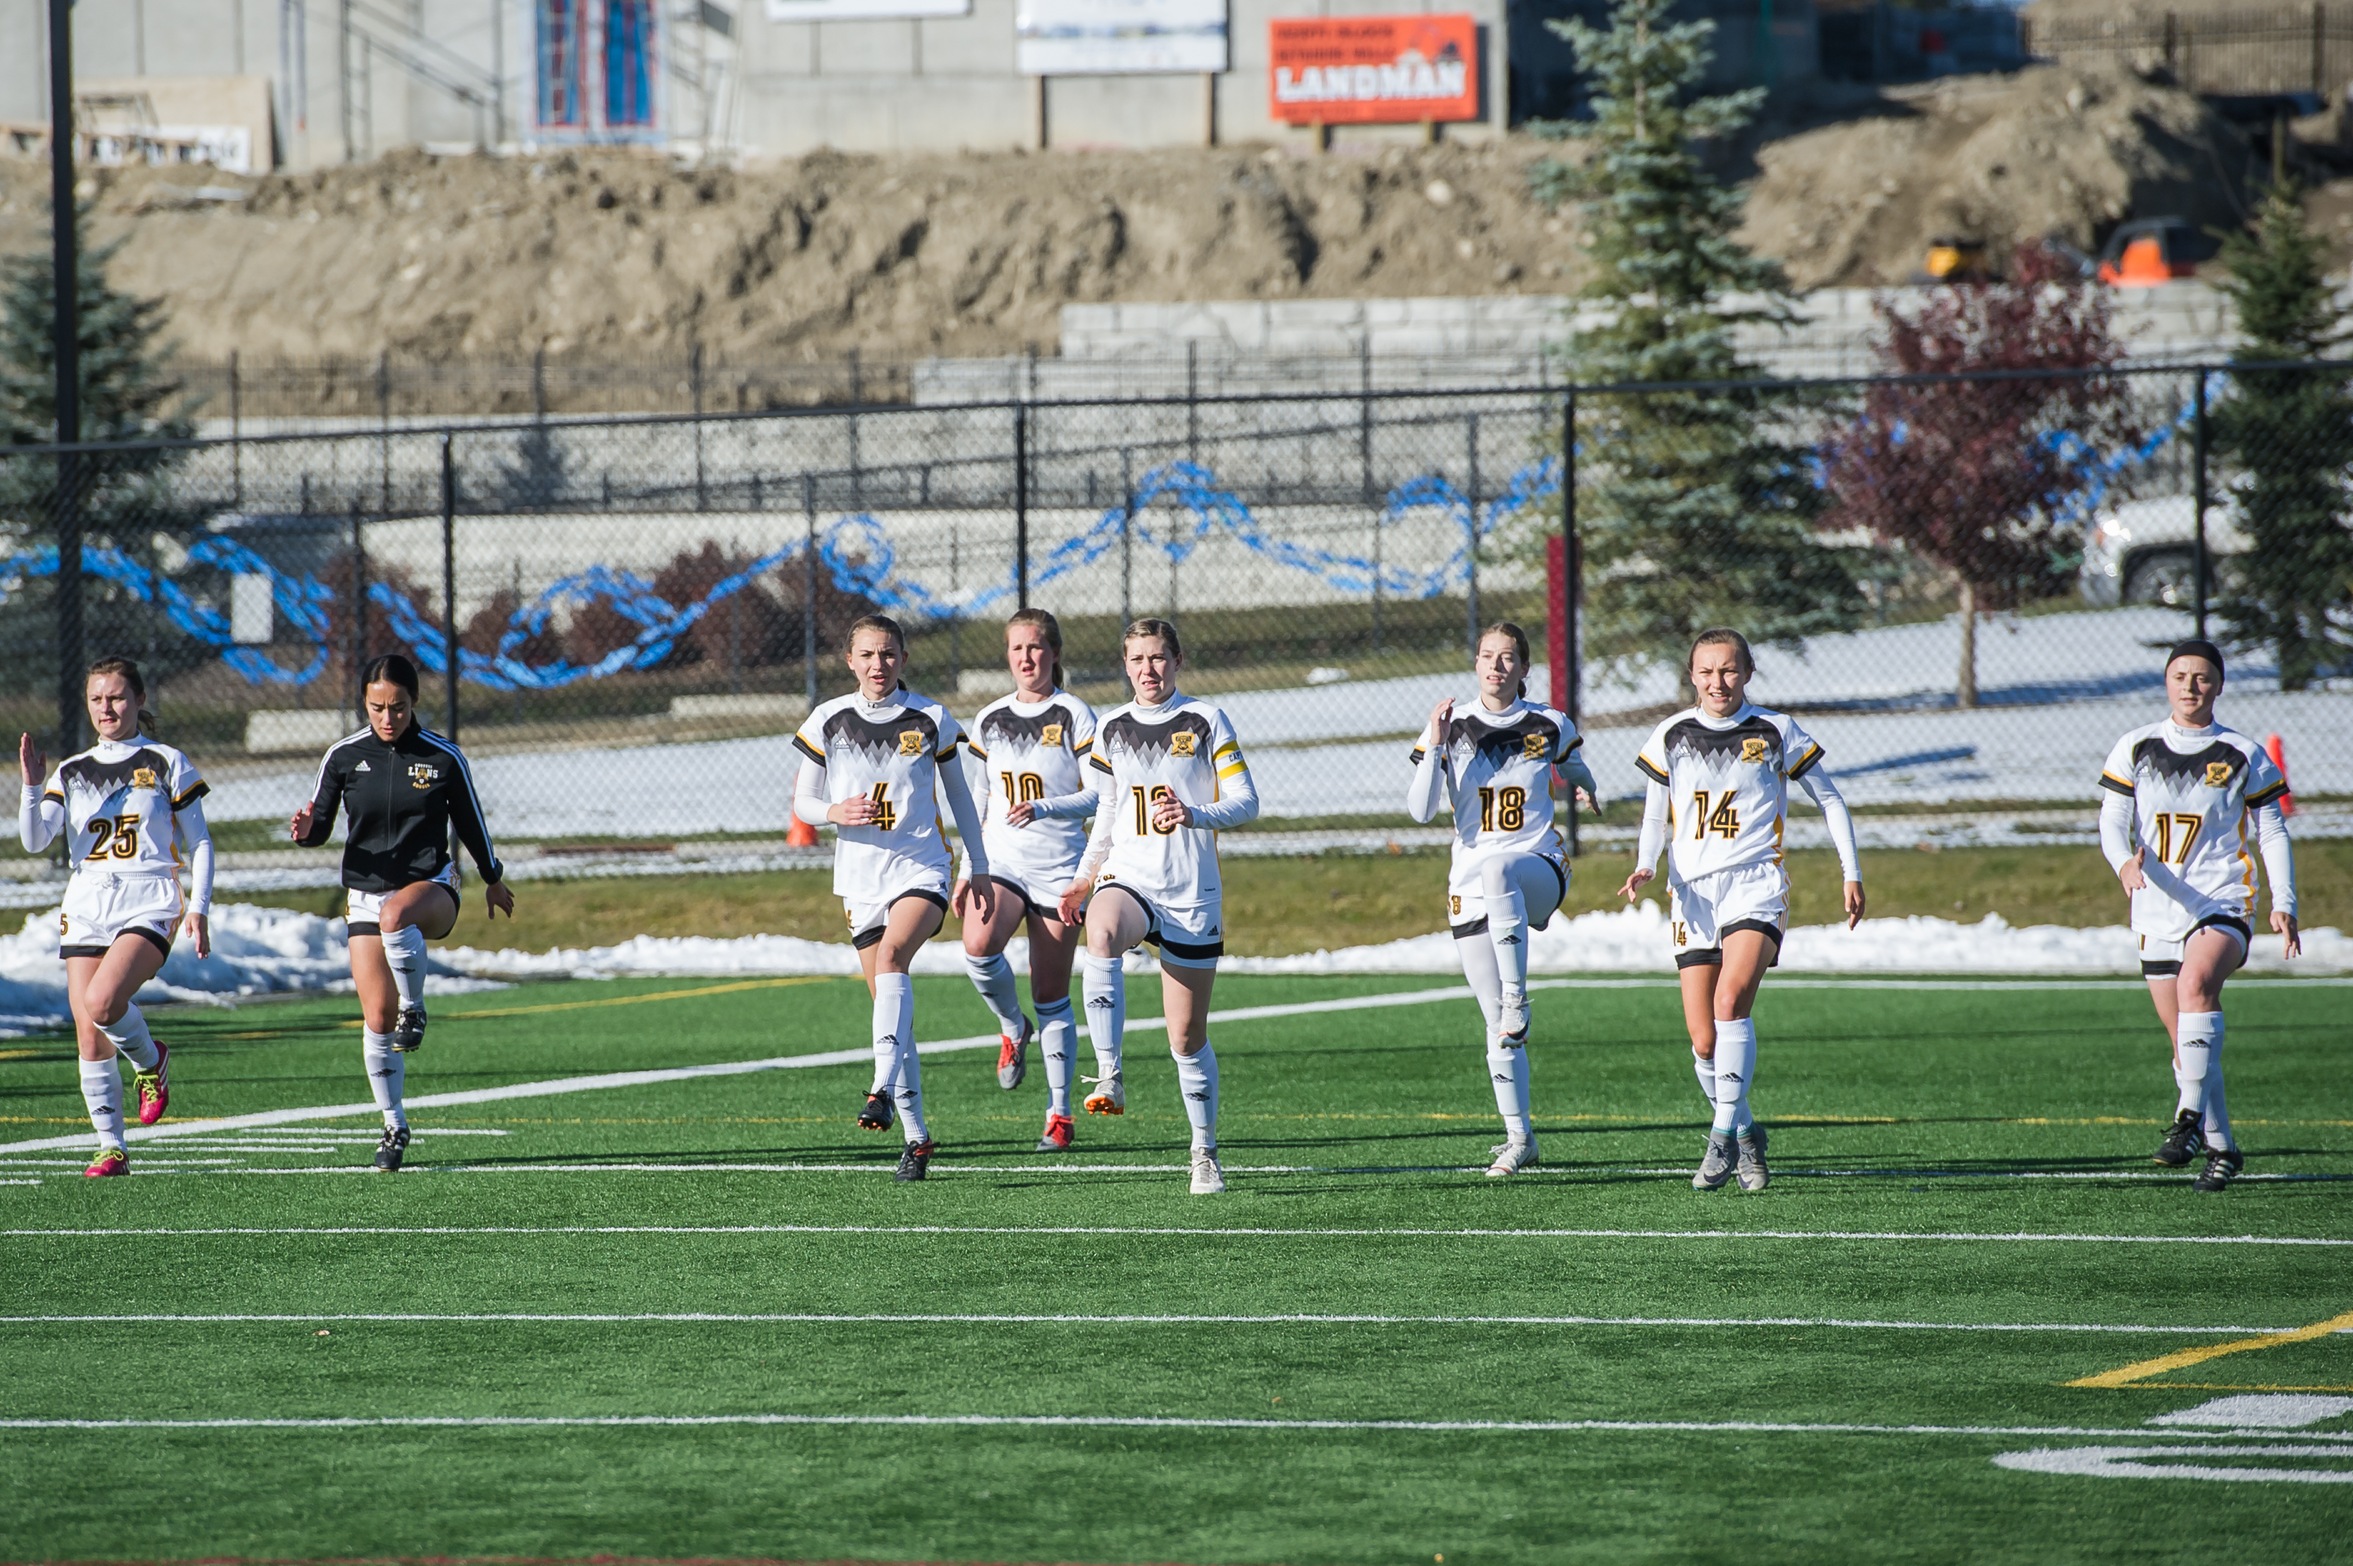 Lions Fall to Olds College in Season Home Opener